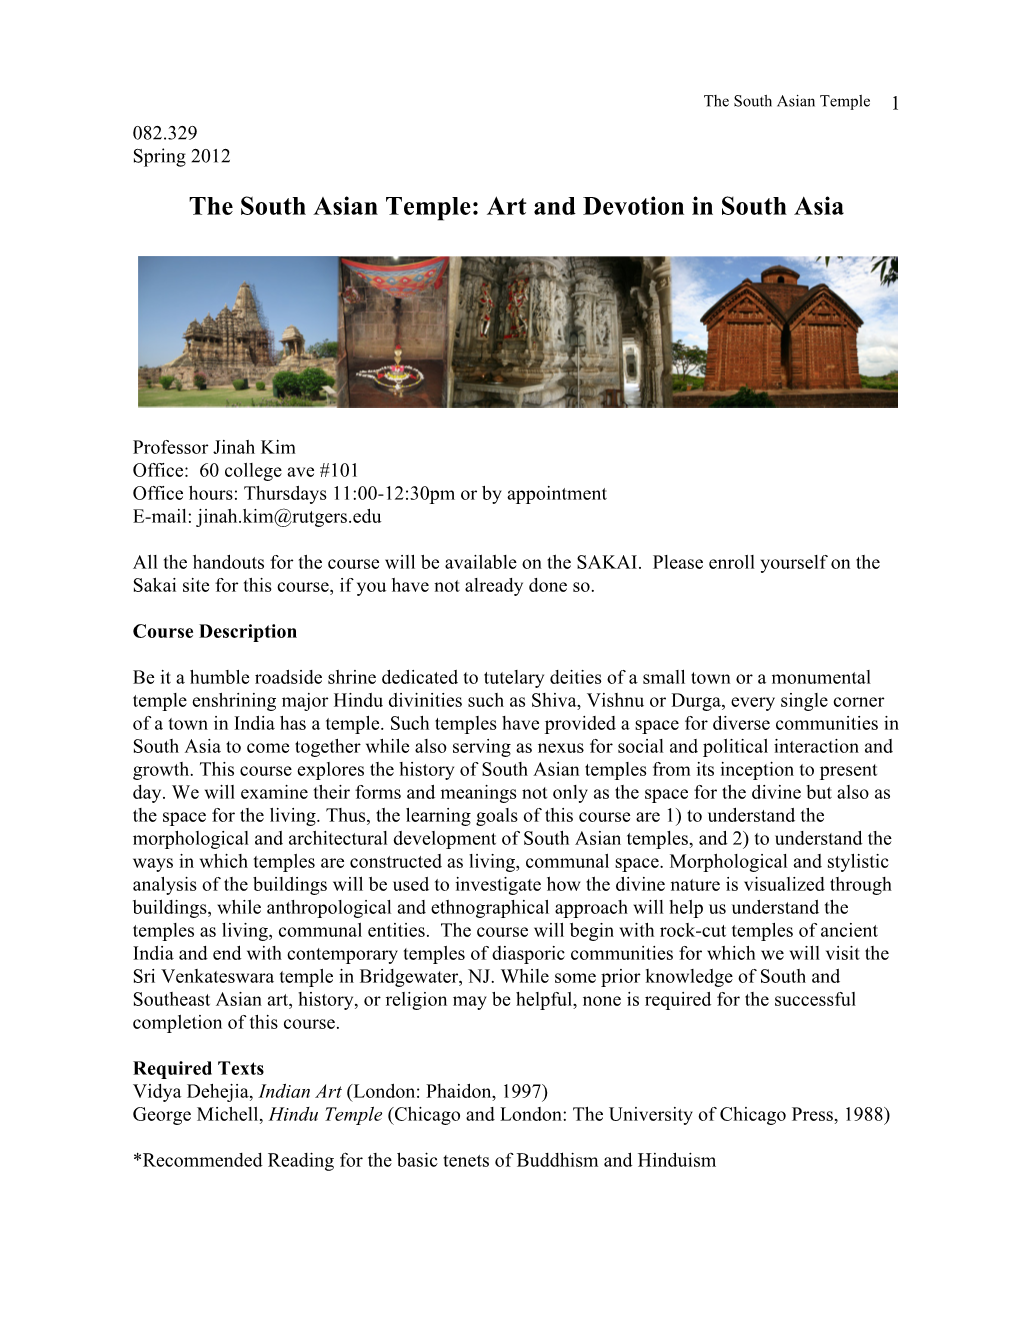 The South Asian Temple: Art and Devotion in South Asia